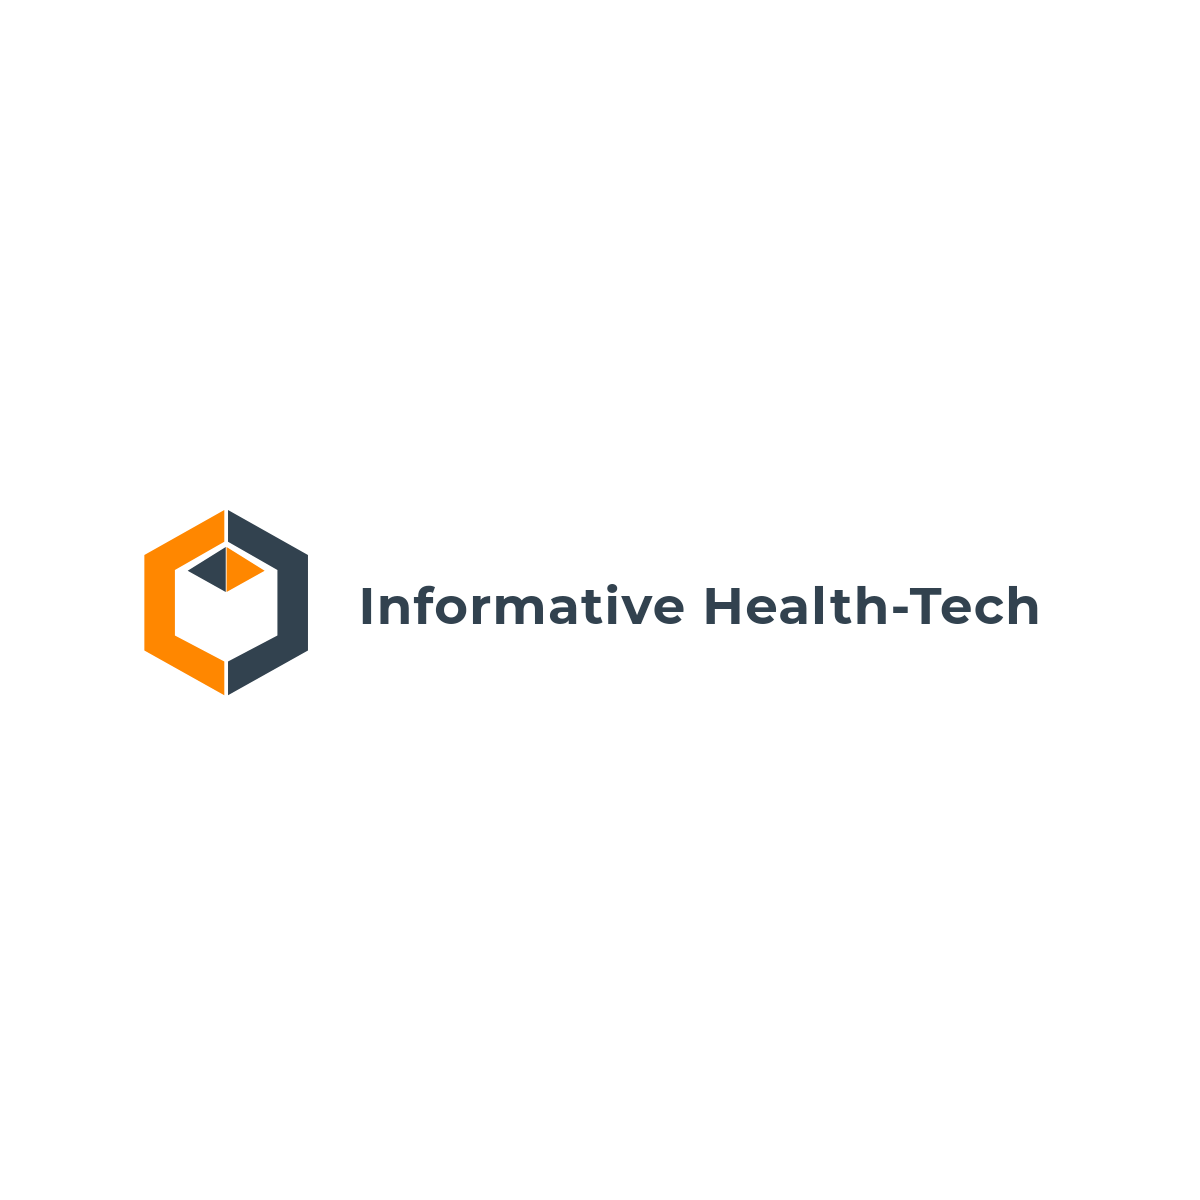 About Informative health-tech